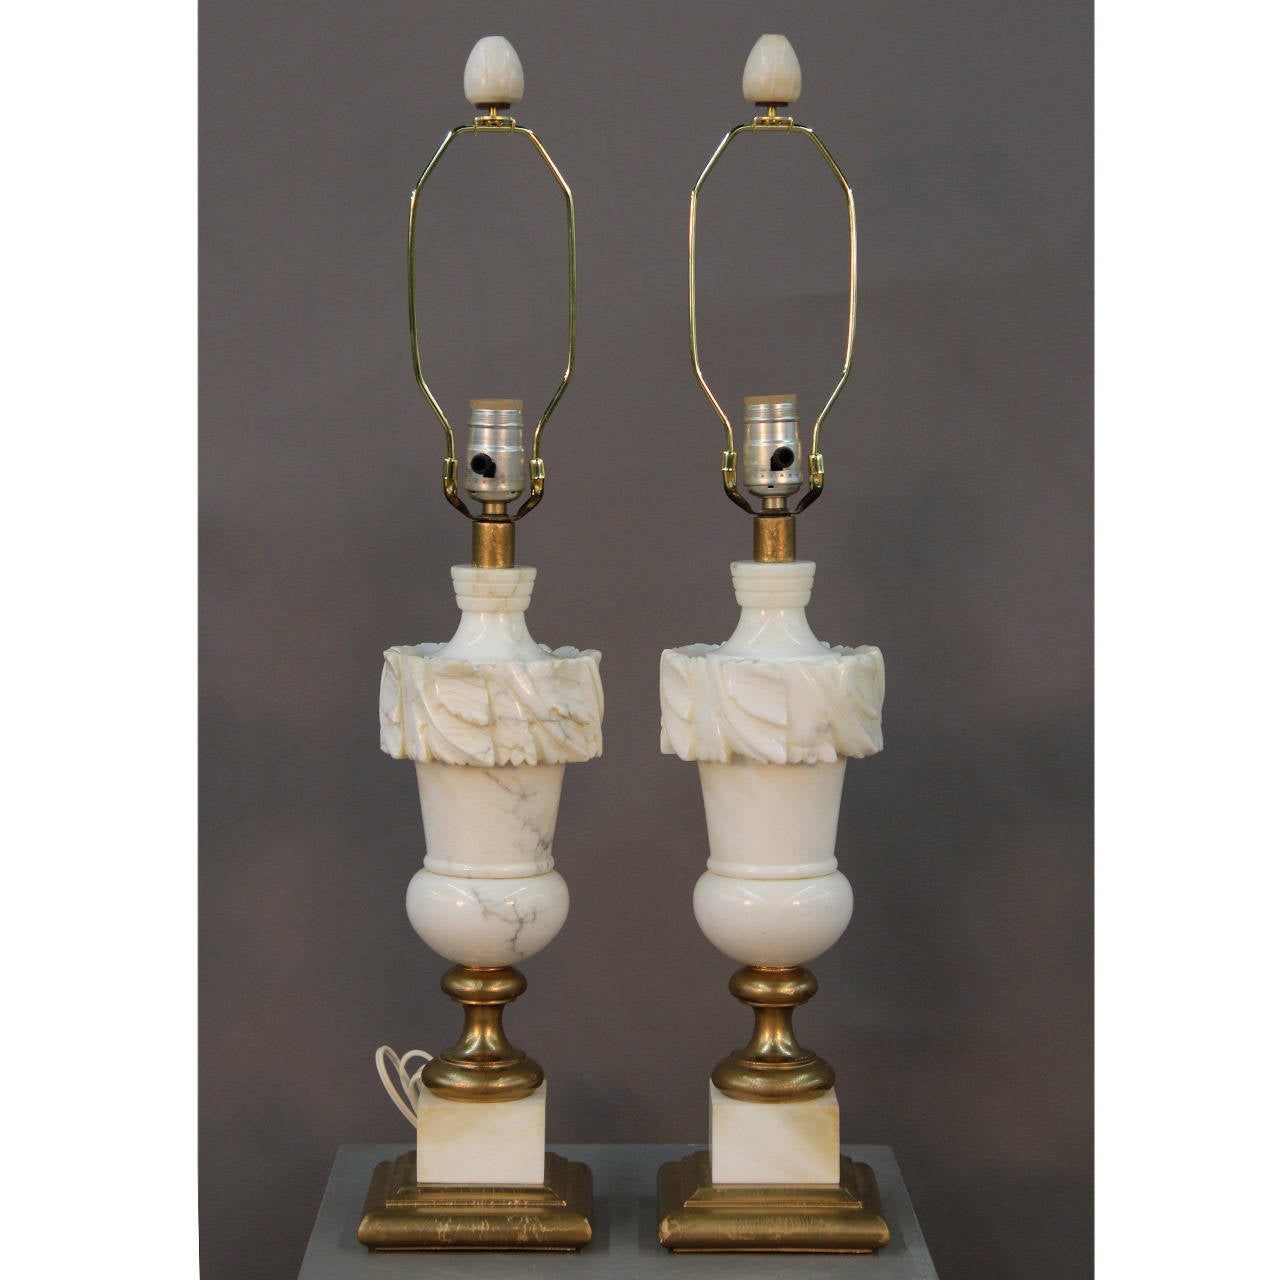 Elegant, beautifully proportioned vintage alabaster lamps with carved leaf design and original alabaster finials. Gilded wood base. Fitted with new natural linen cut corner shades.